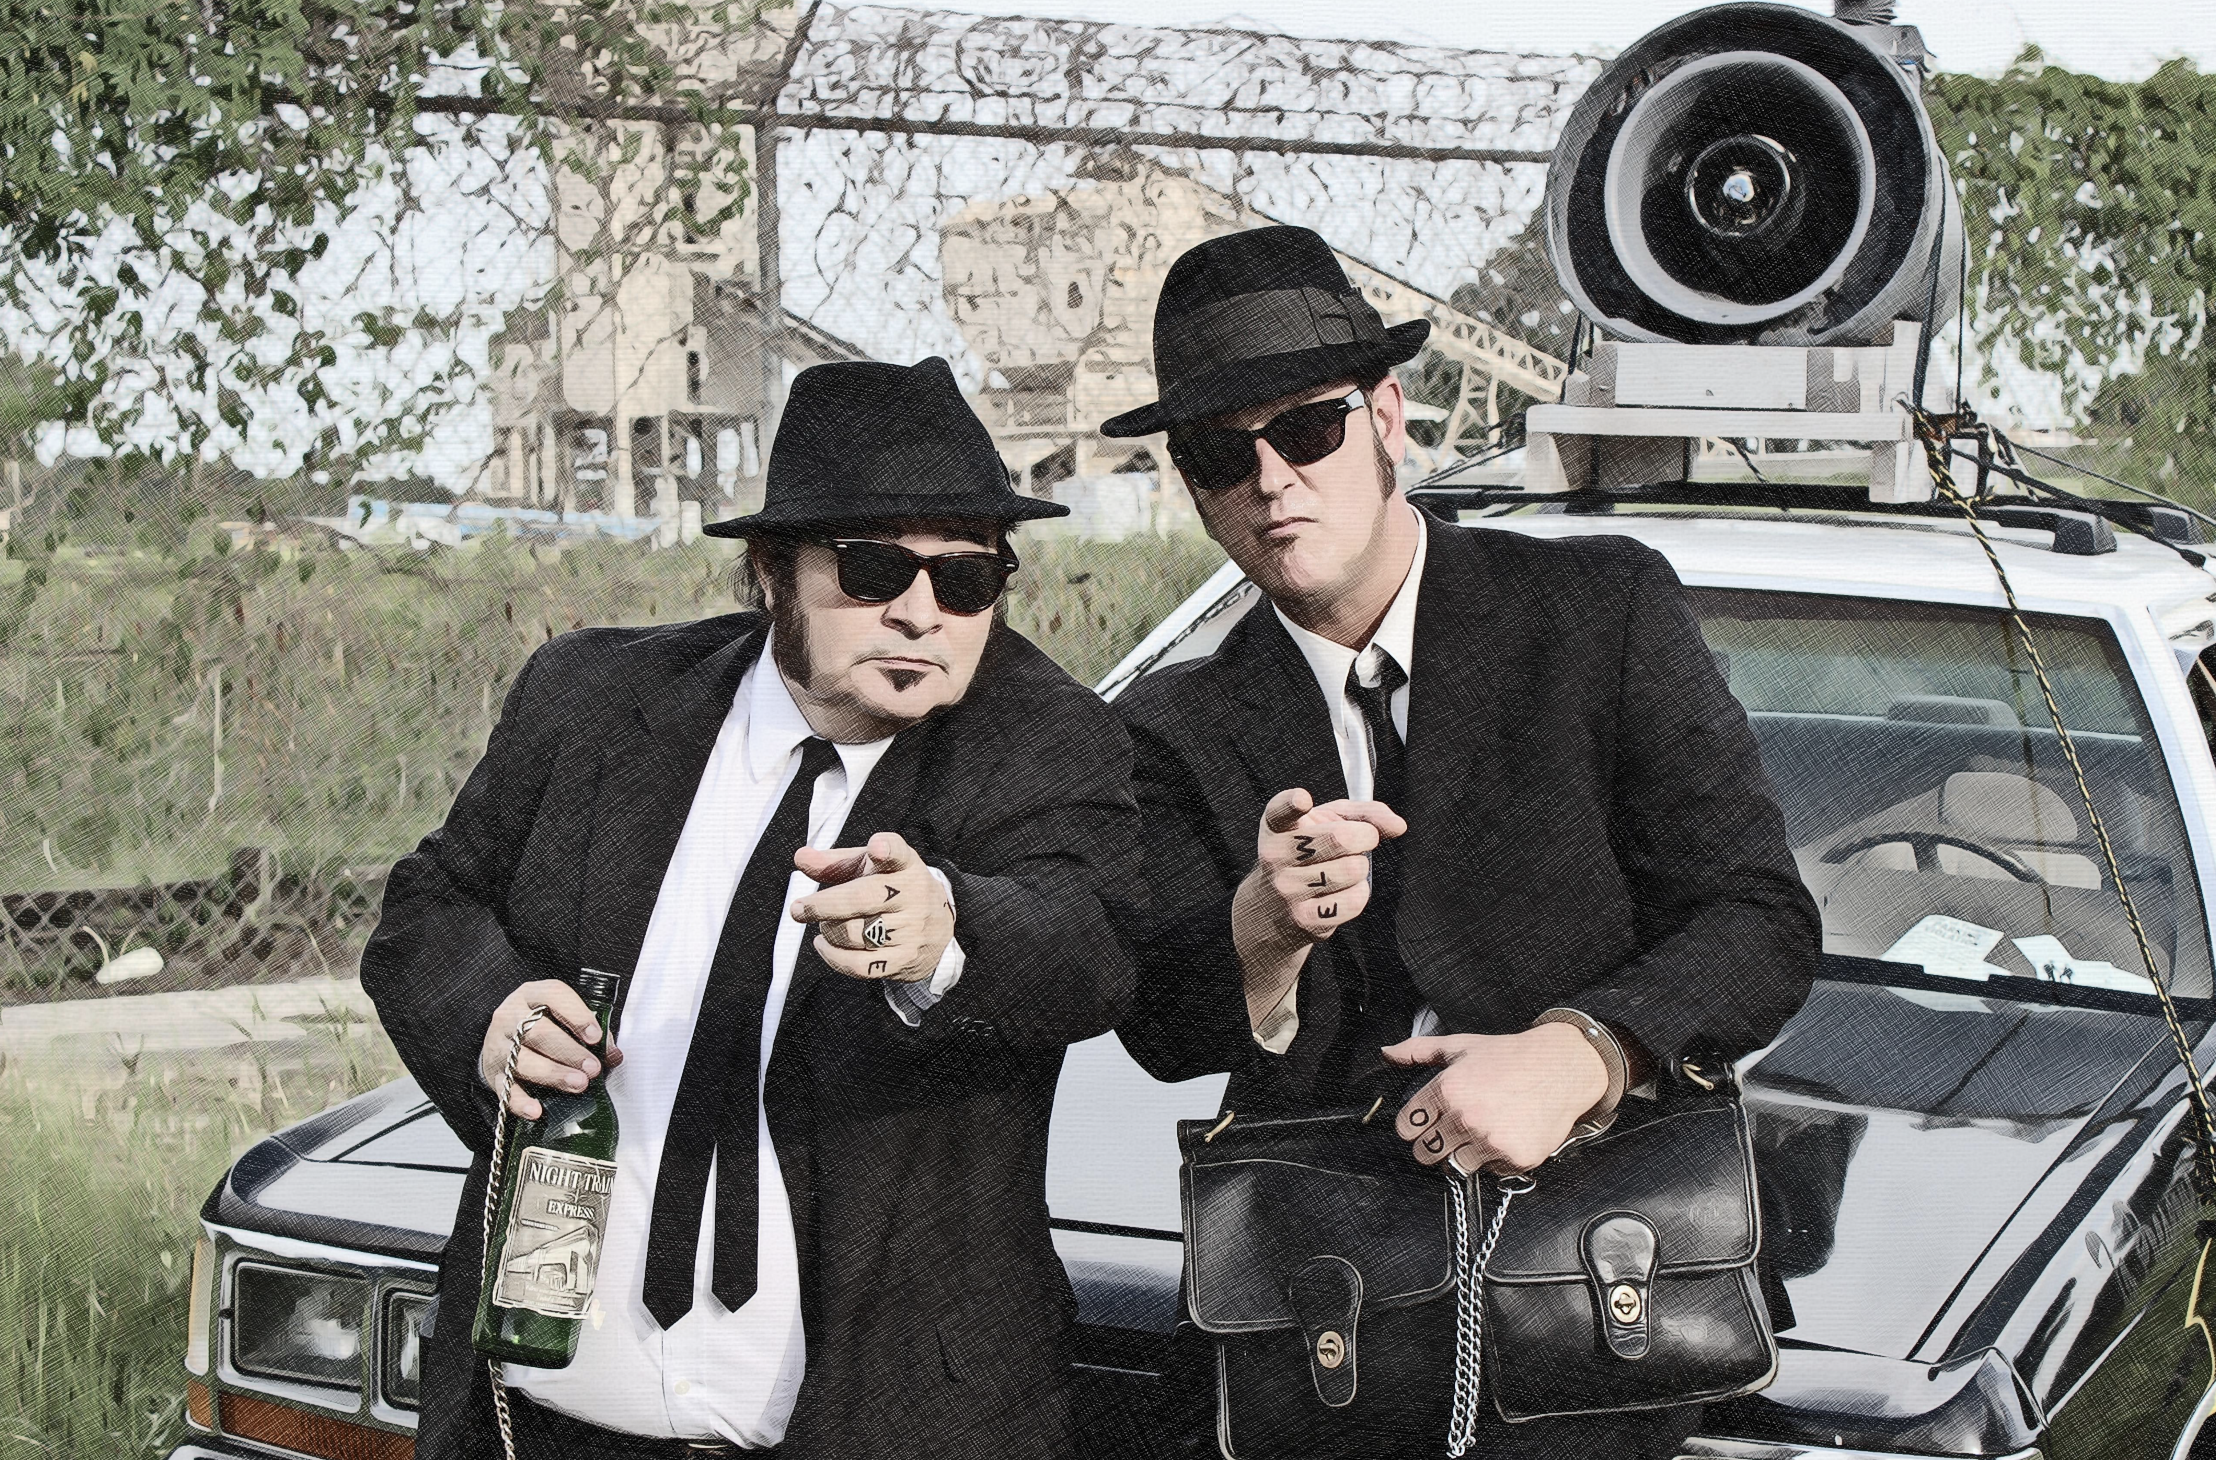 The Leesburg Blues Brothers Tribute Artists